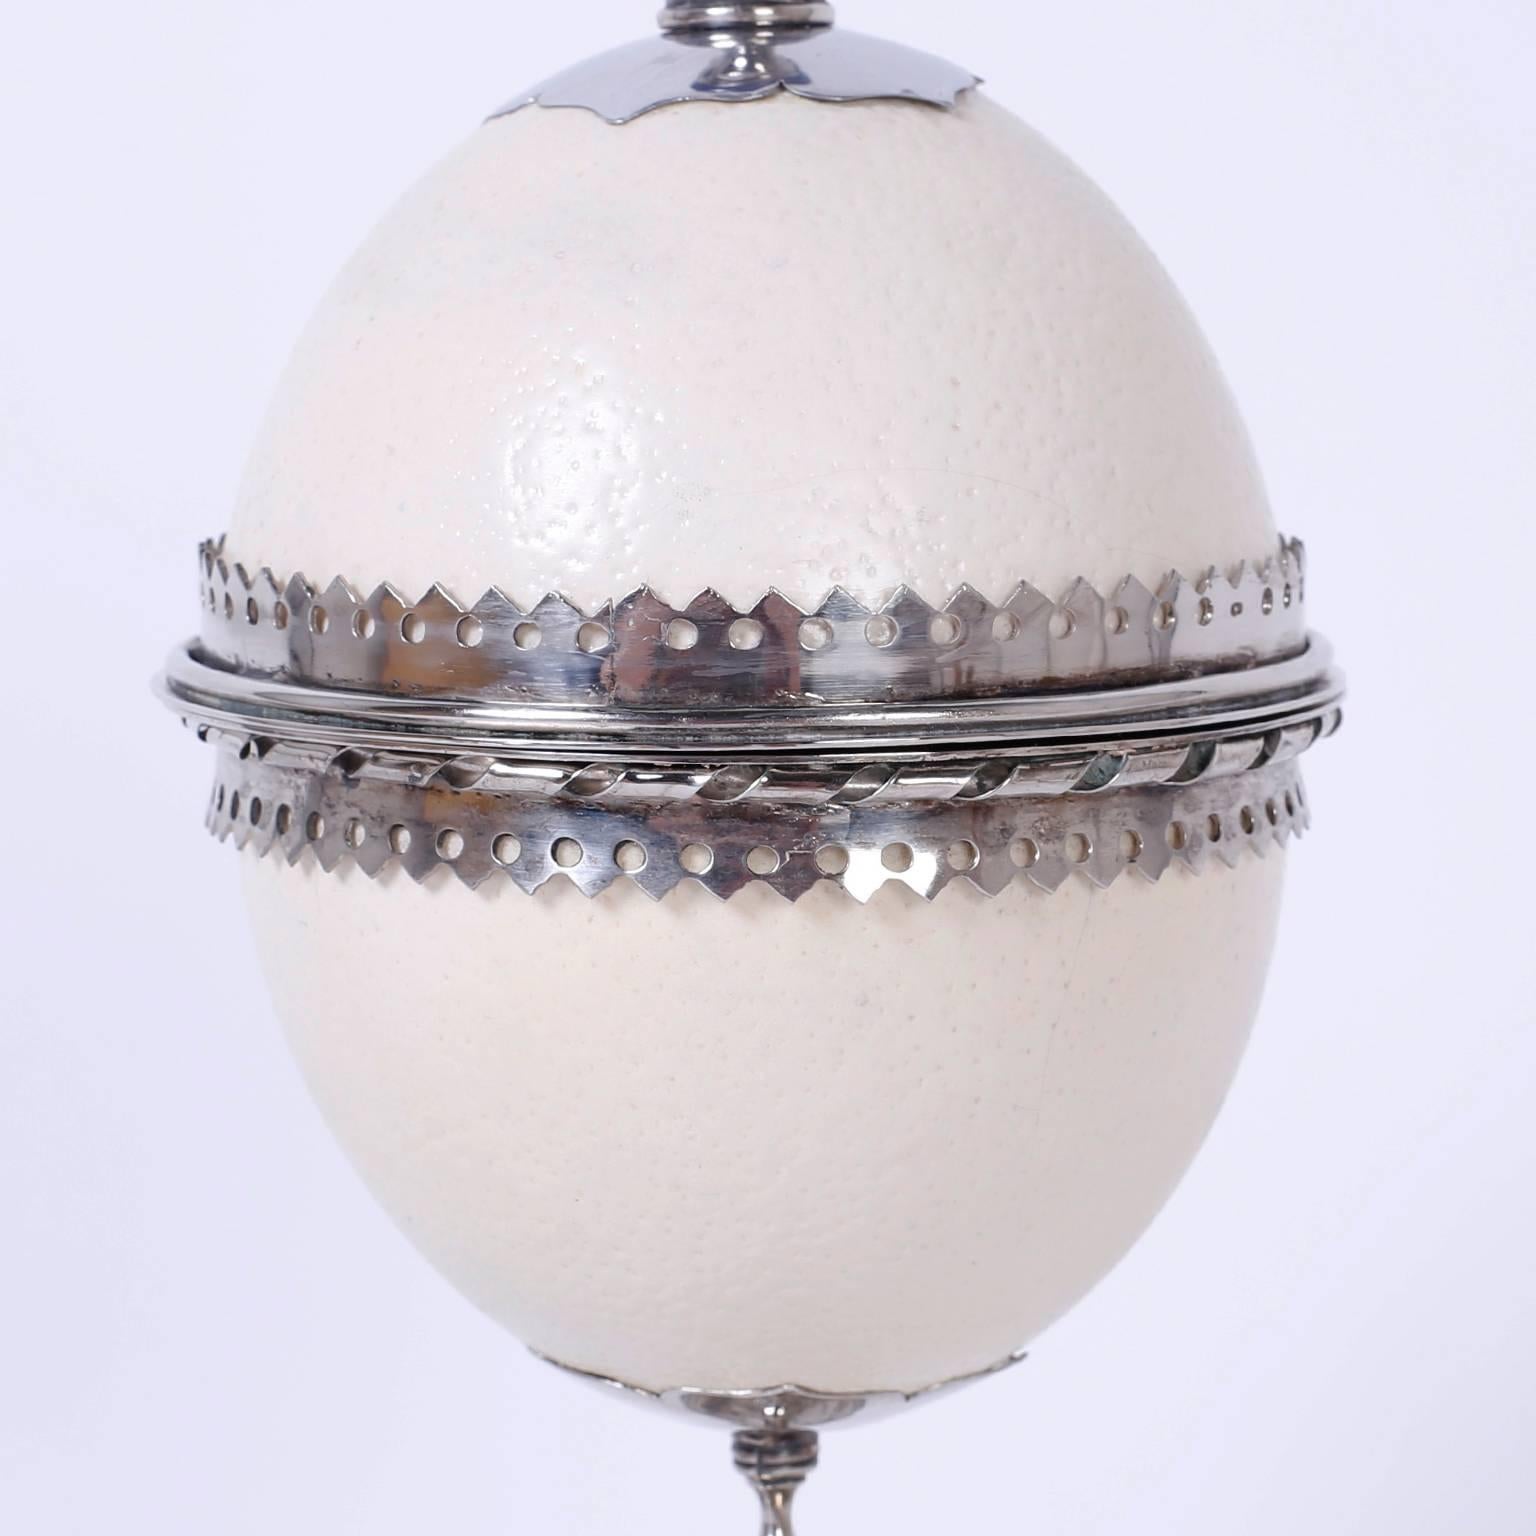 British Colonial Pair of Redmile Ostrich Egg Garnitures